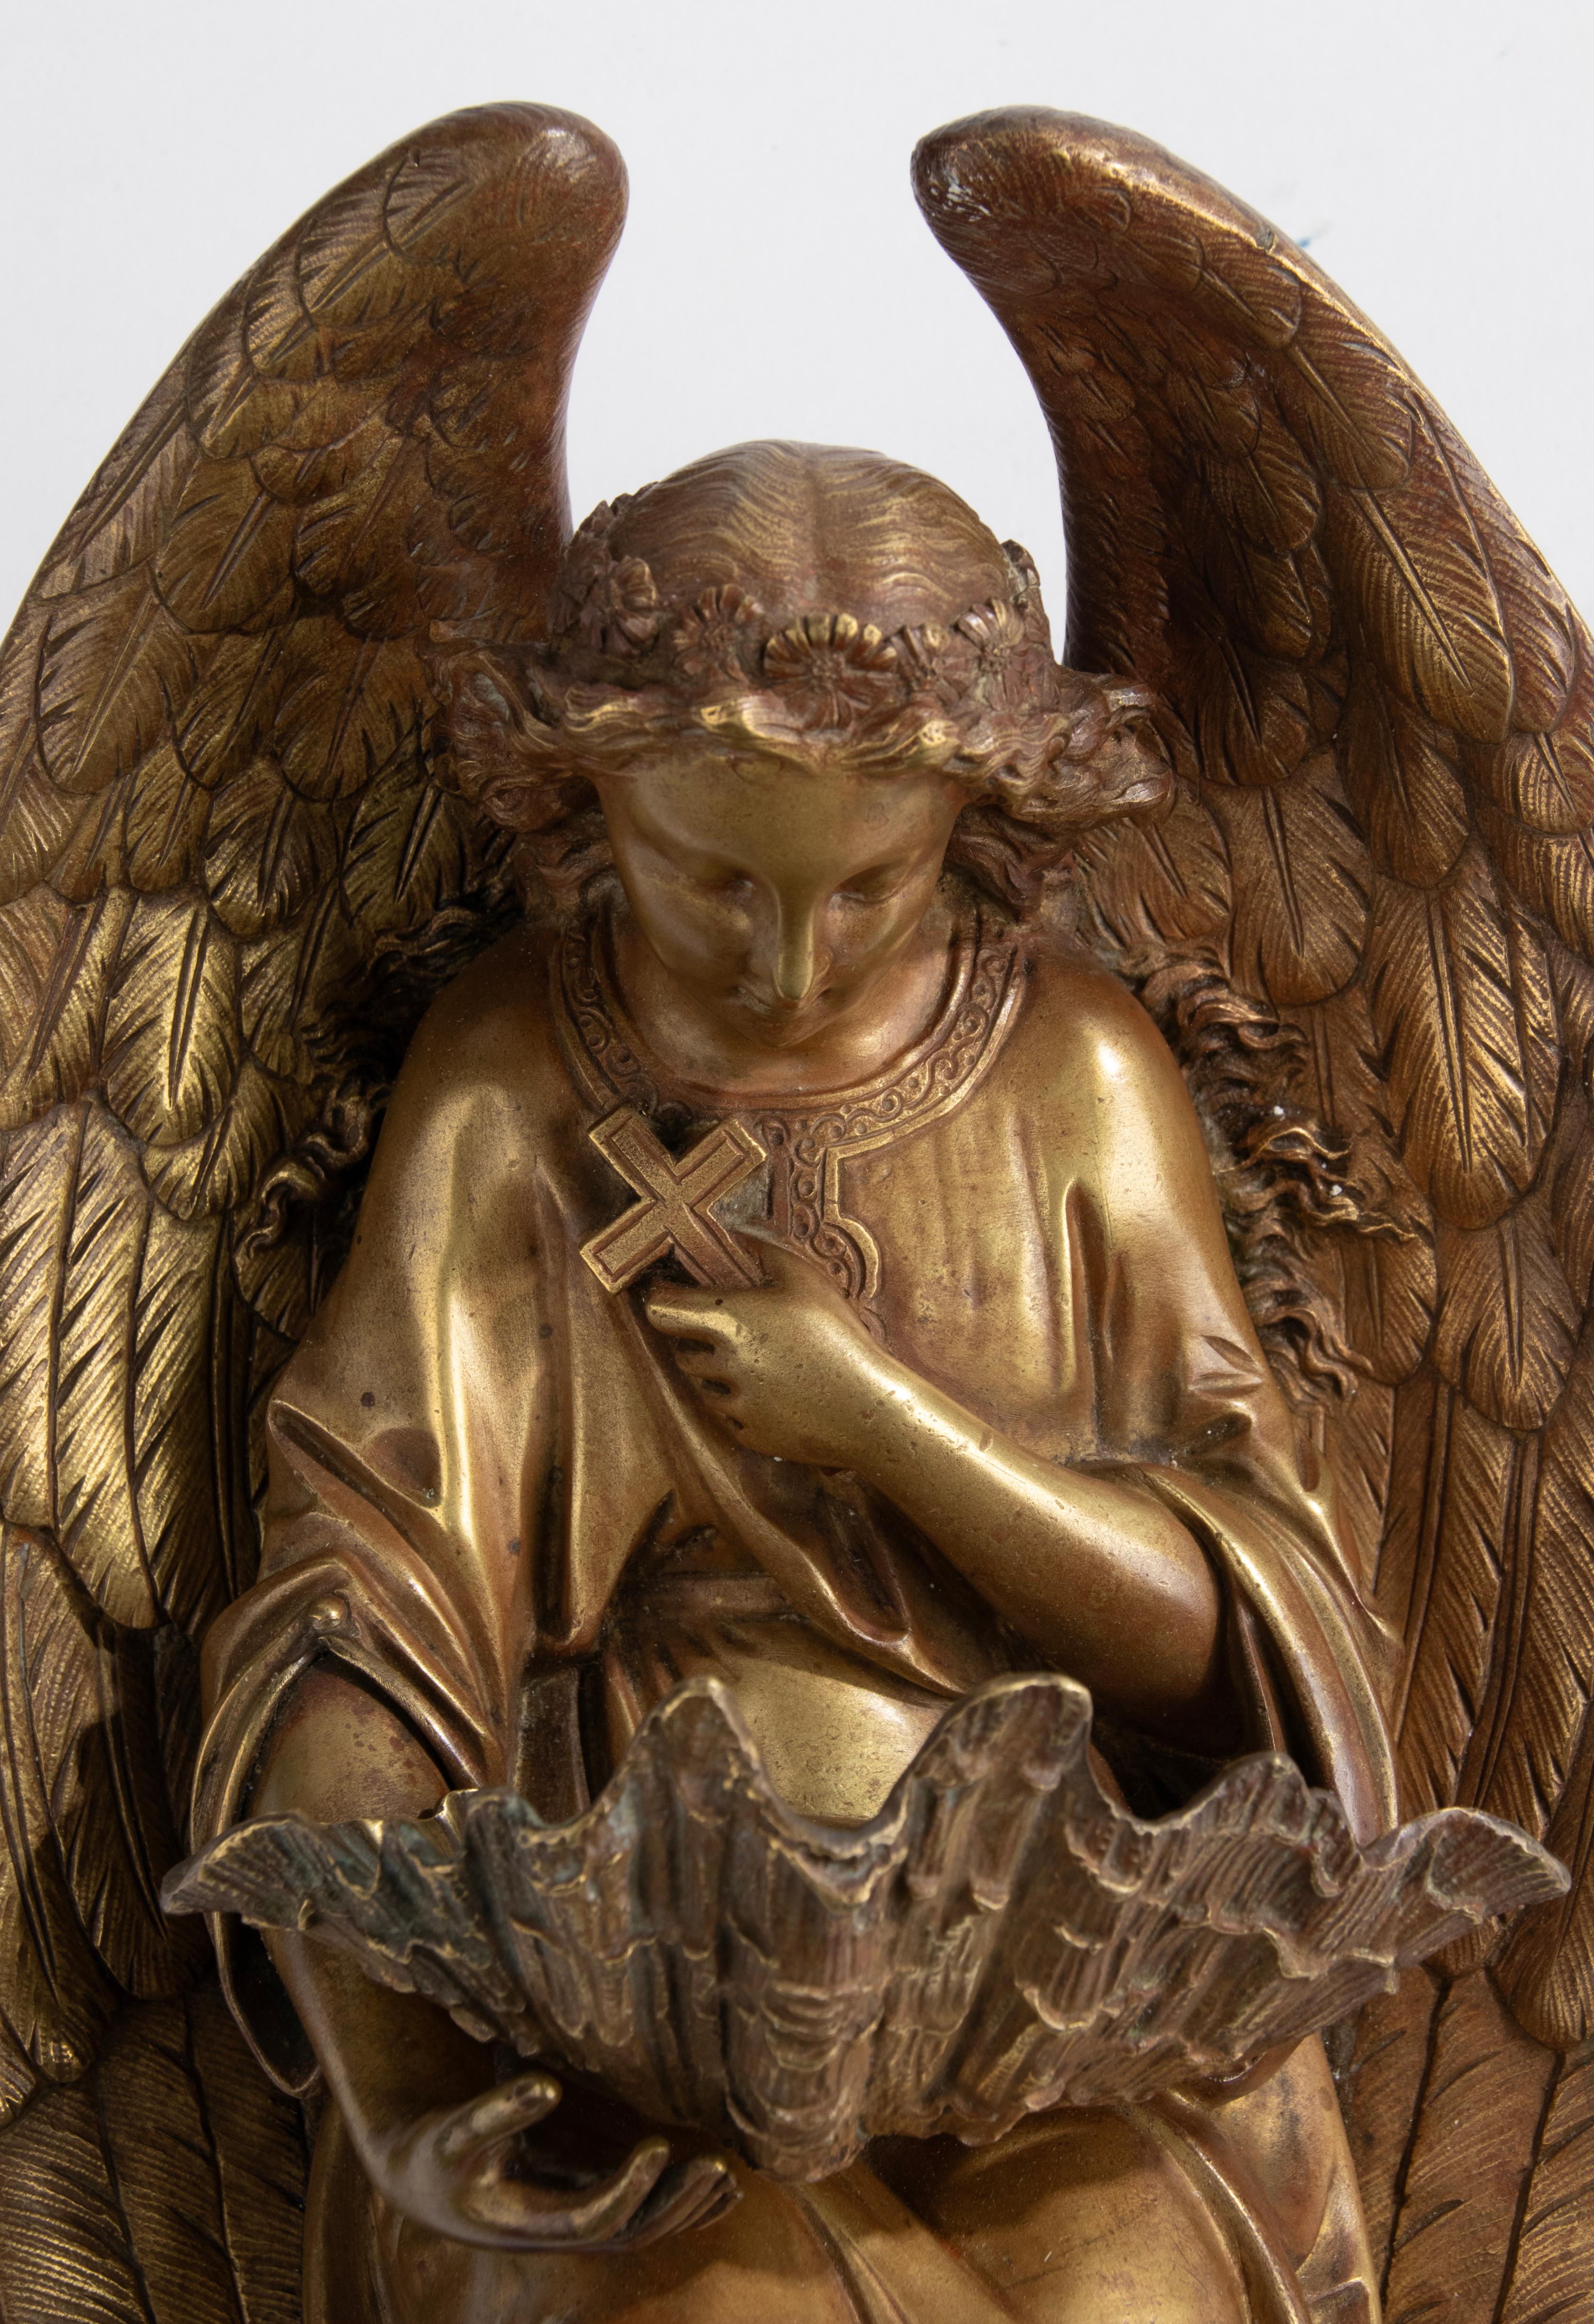 A fine quality antique holy water font for on a wall, made of casted and chiseled bronze. Depicting an angel with a shell as a holy water font.
Signed at the backside of the lid, Leblanc Frères. Made in France, 1895-1915

Leblanc Frères was